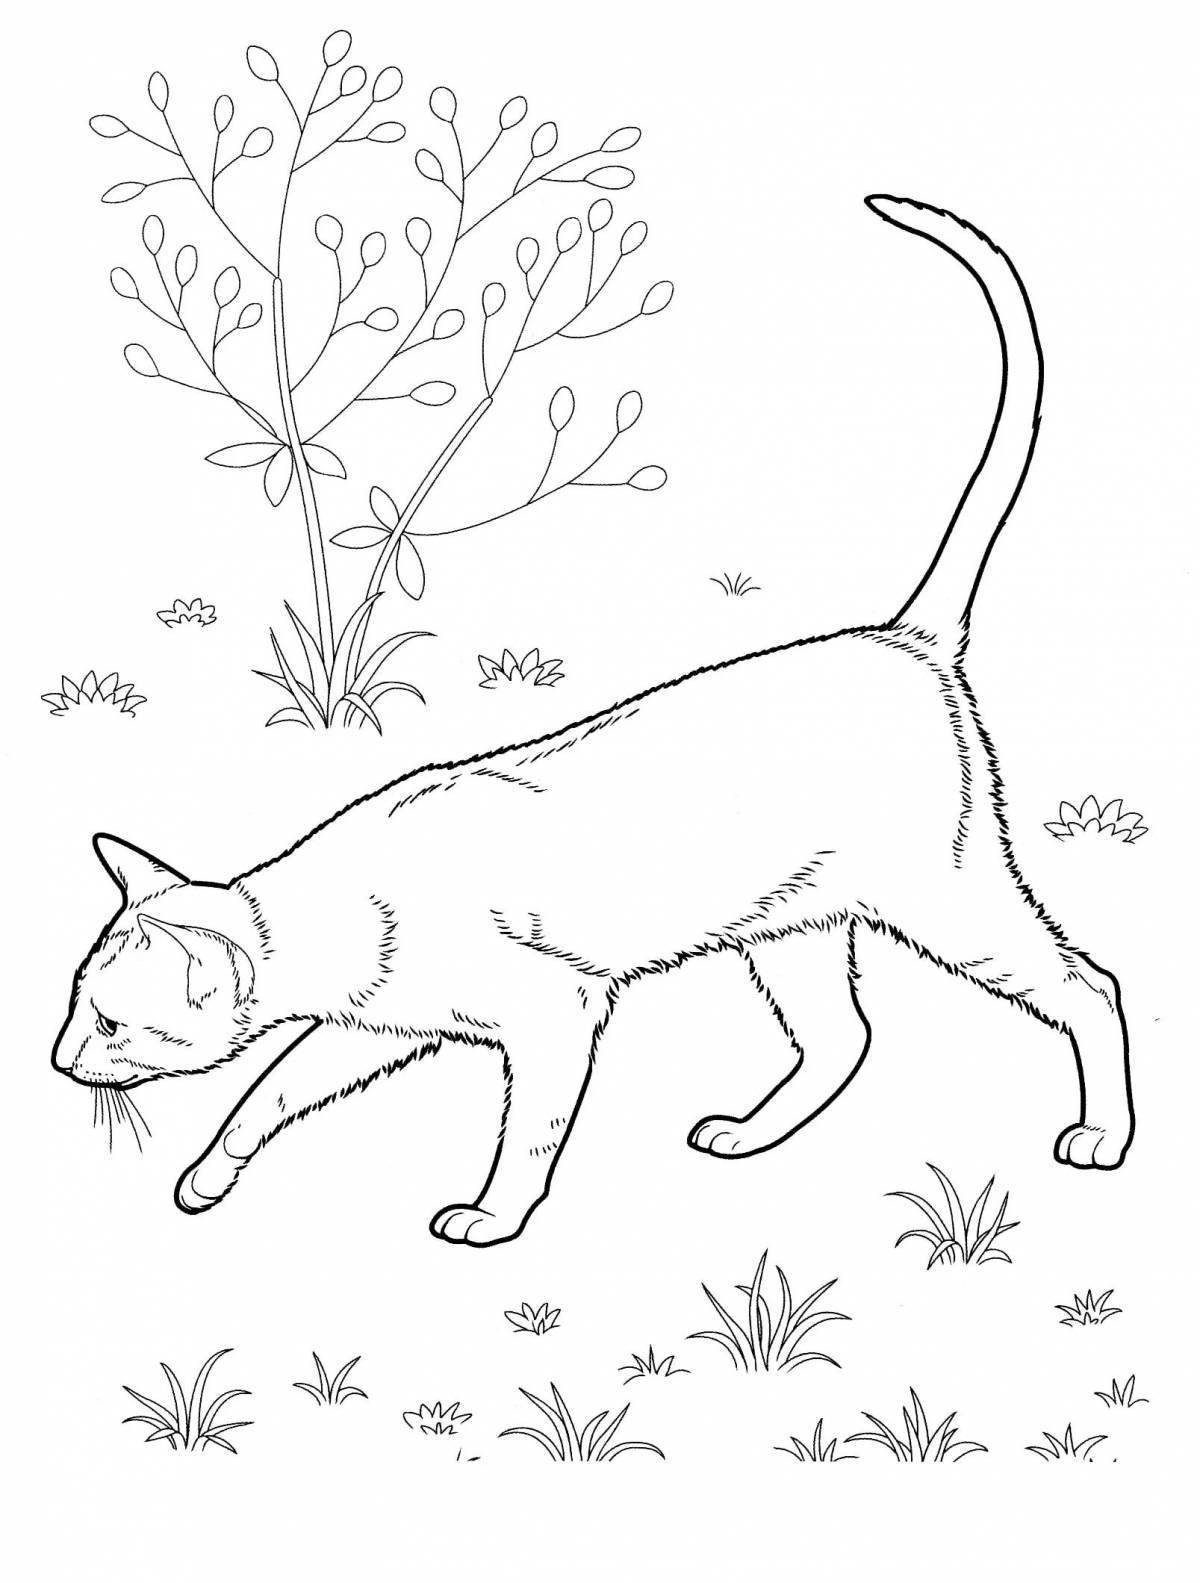 Playful all cats coloring page